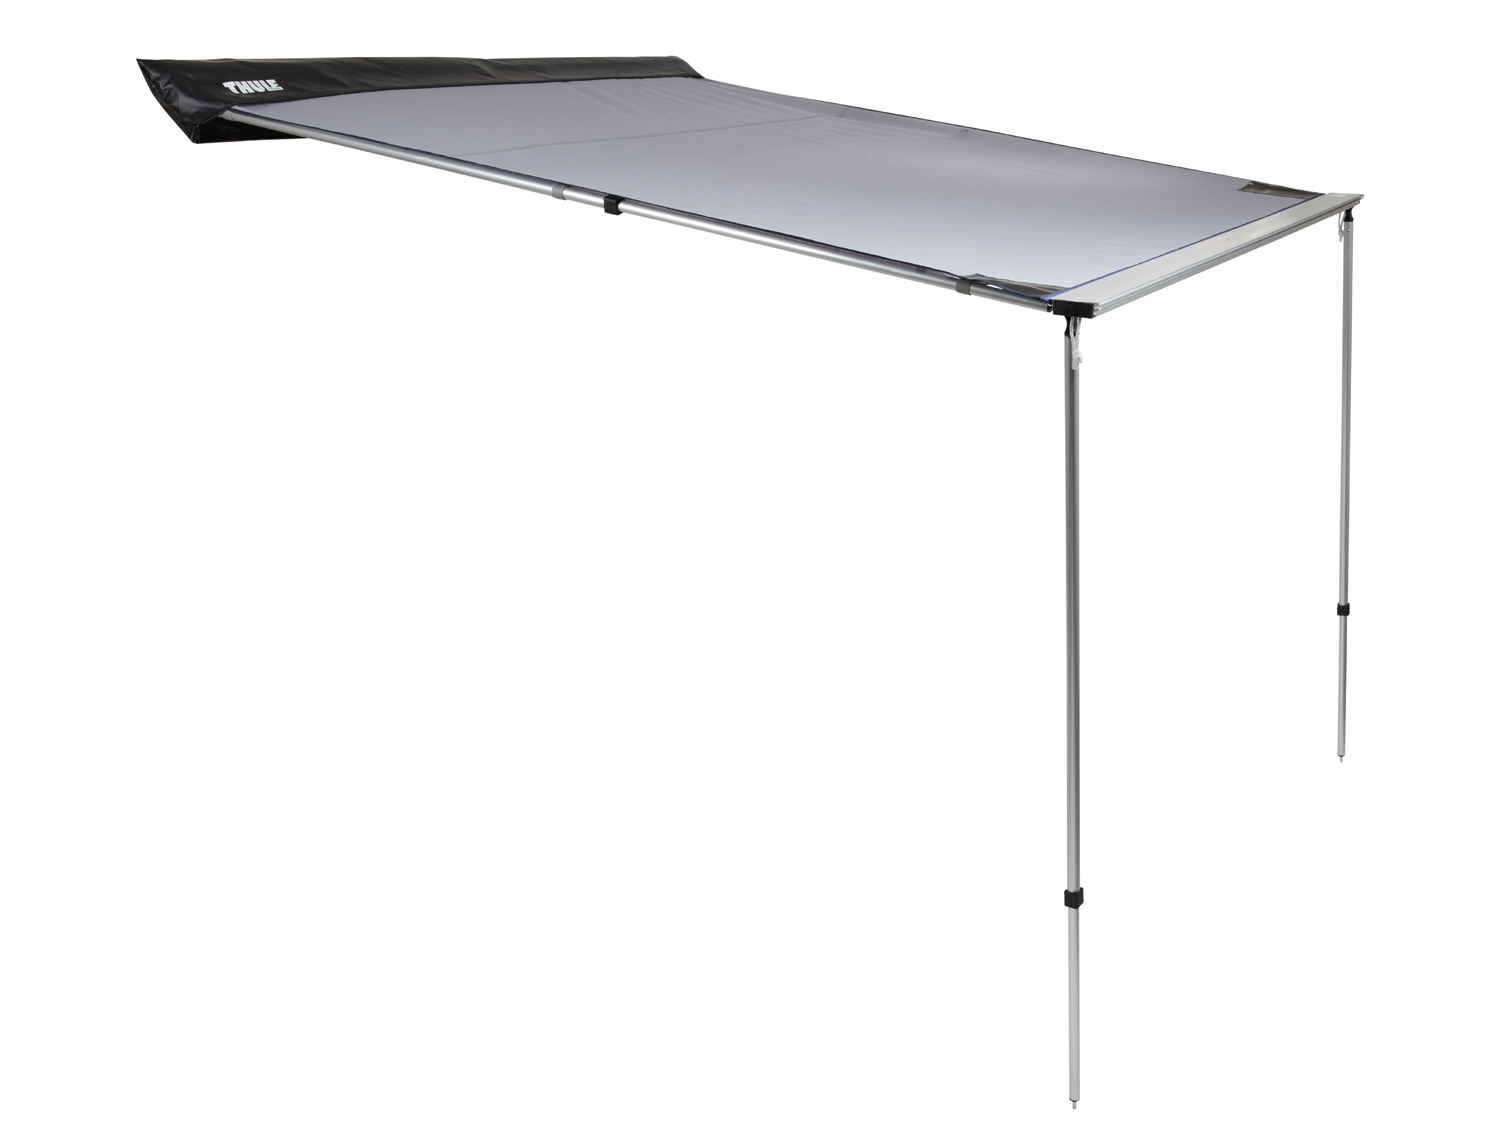 Image for OverCast Awning by Thule from AccessoriesCanada